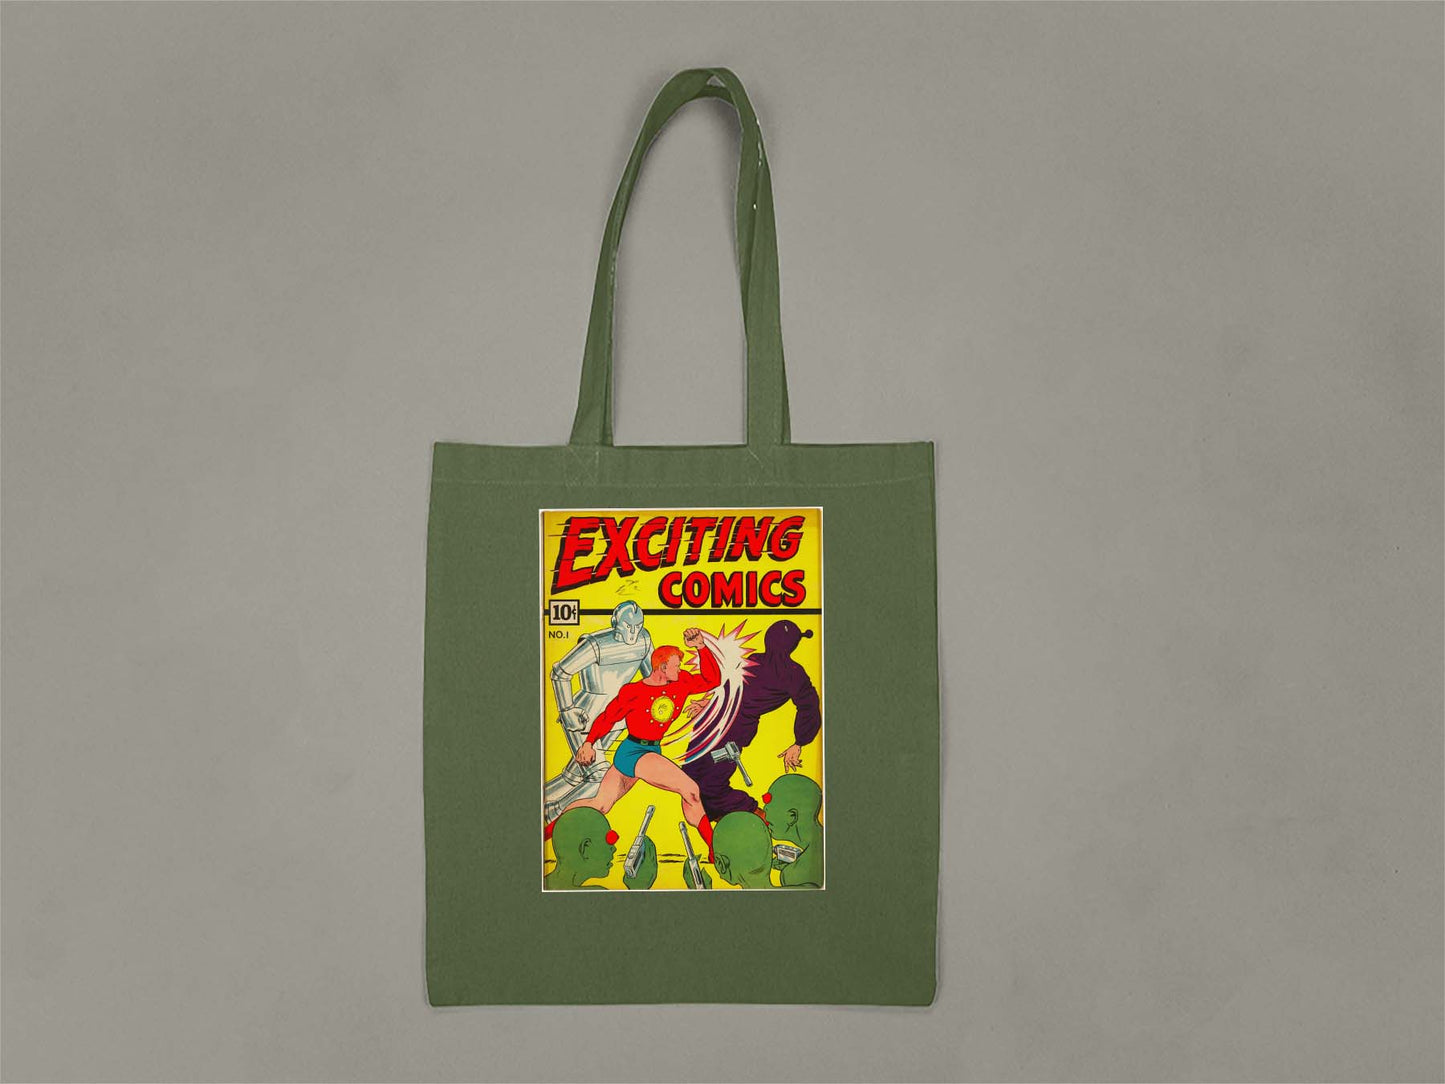 Exciting Comics No.1 Tote Bag  Forest Green